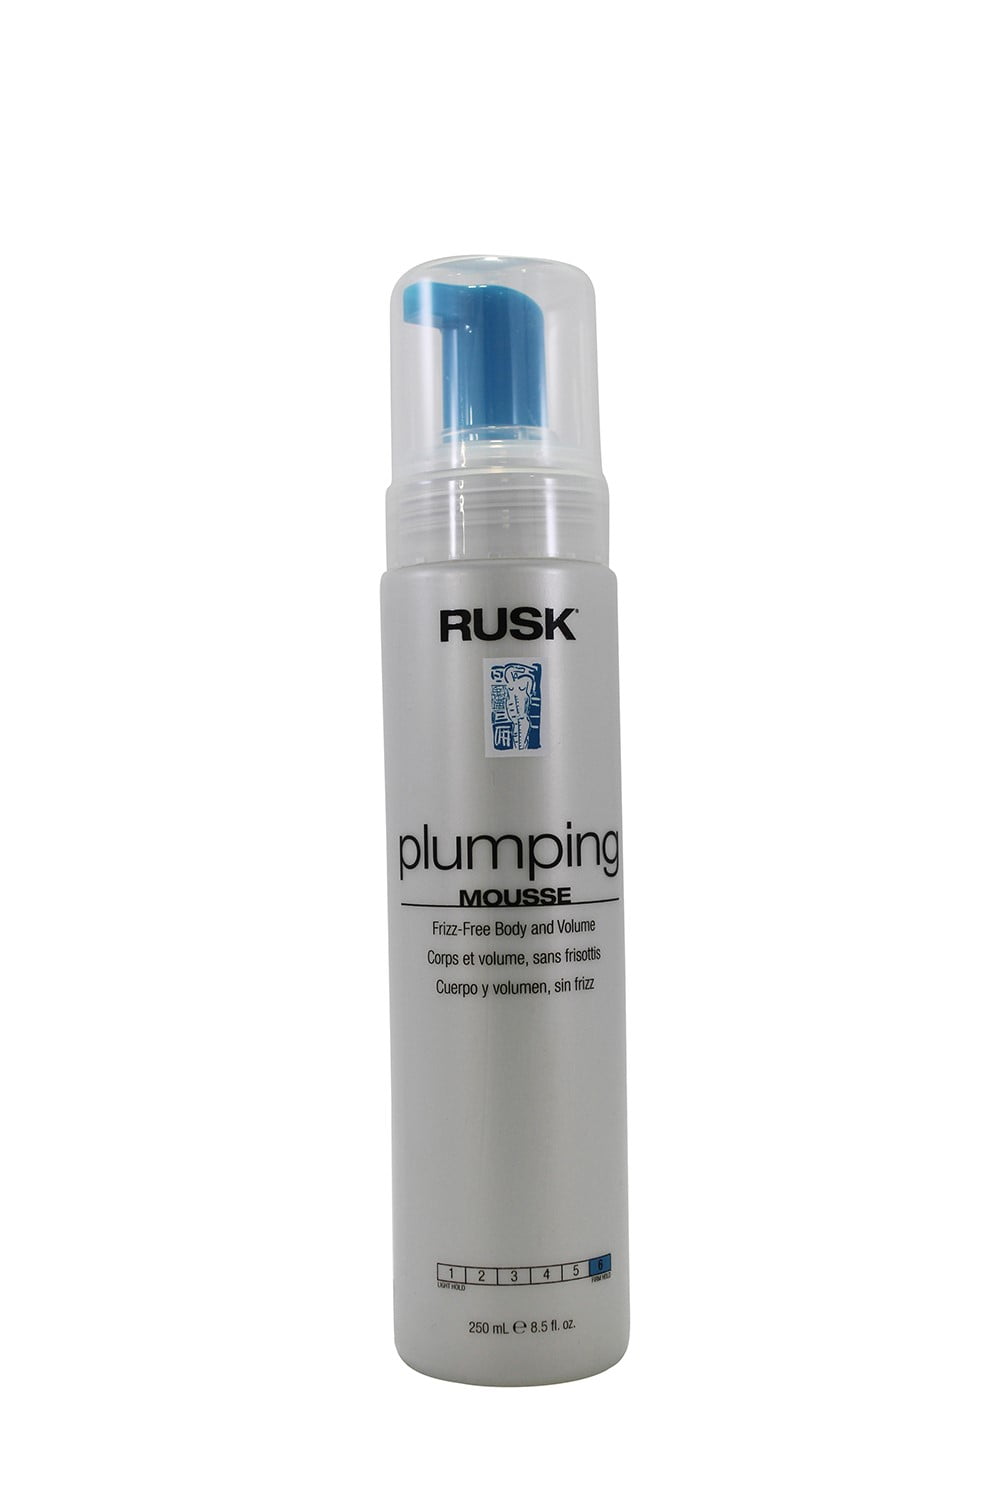 rusk plumping mousse travel size